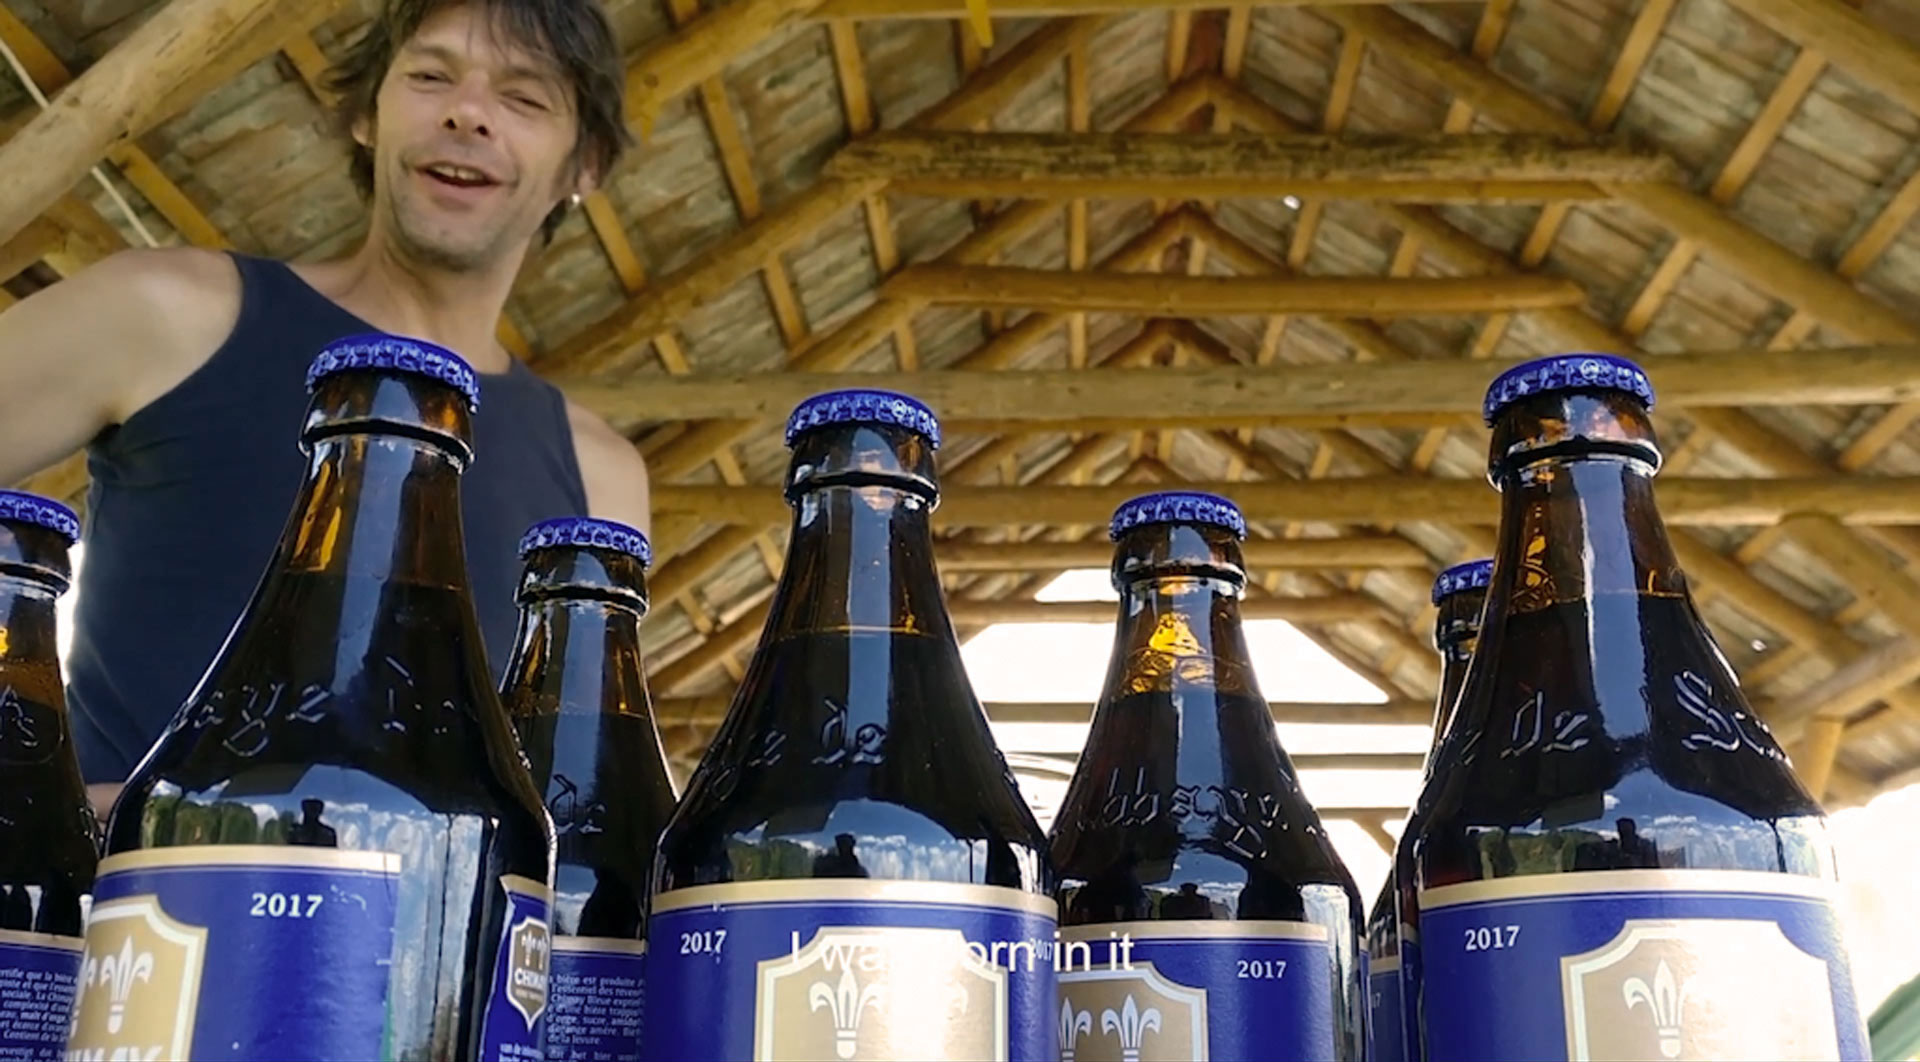 Dirk in front of several bottles of Chimay Bleue